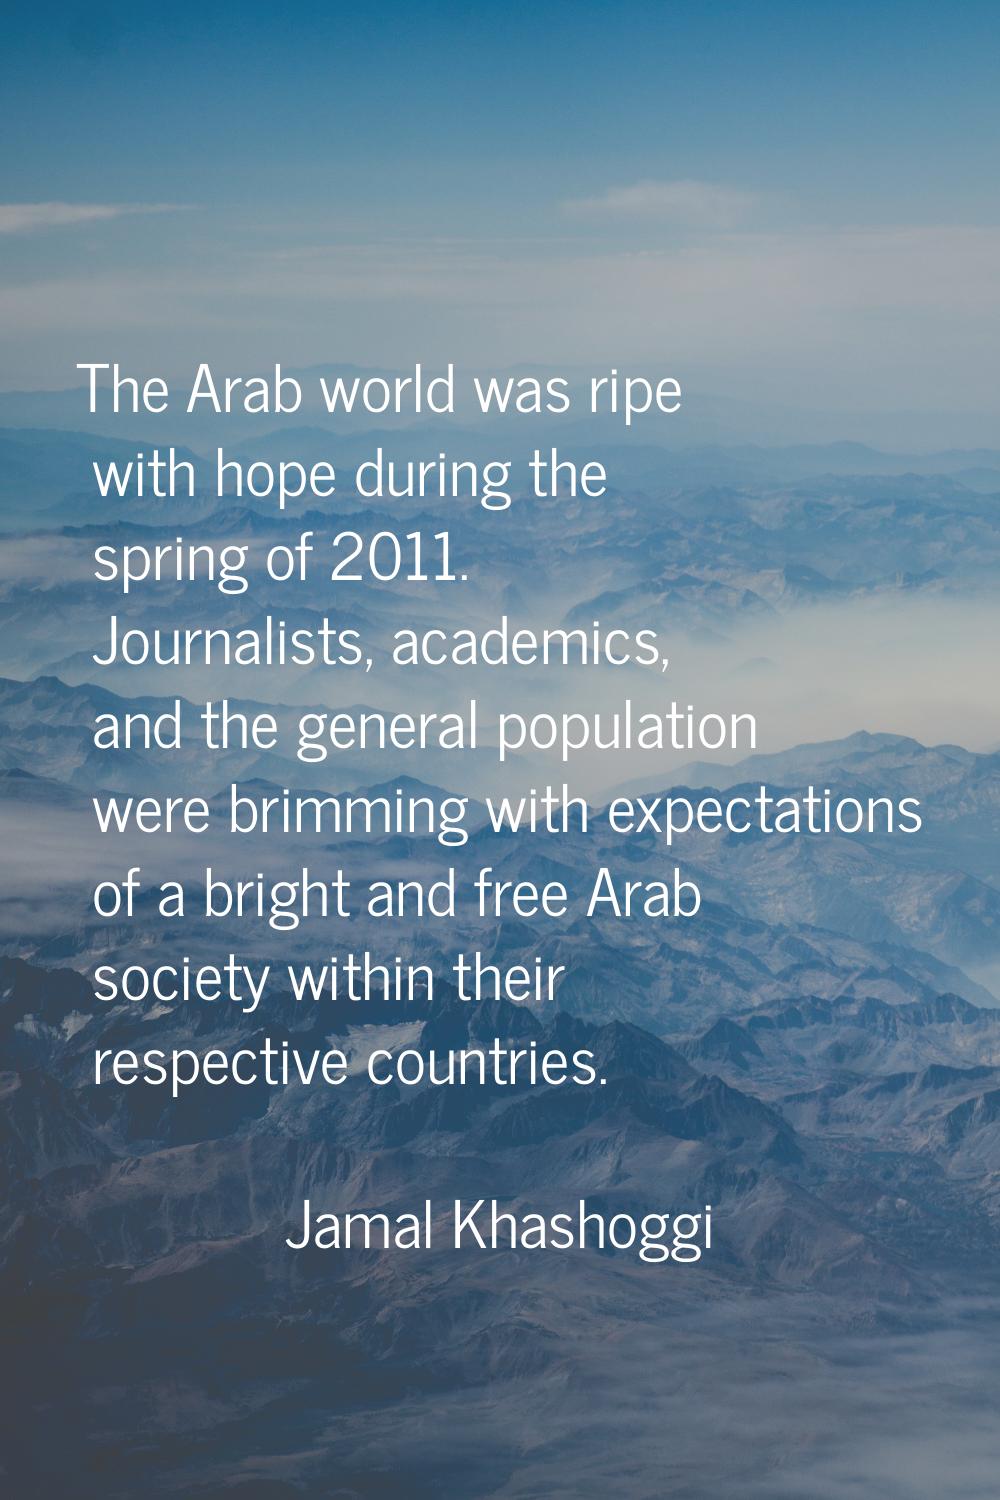 The Arab world was ripe with hope during the spring of 2011. Journalists, academics, and the genera